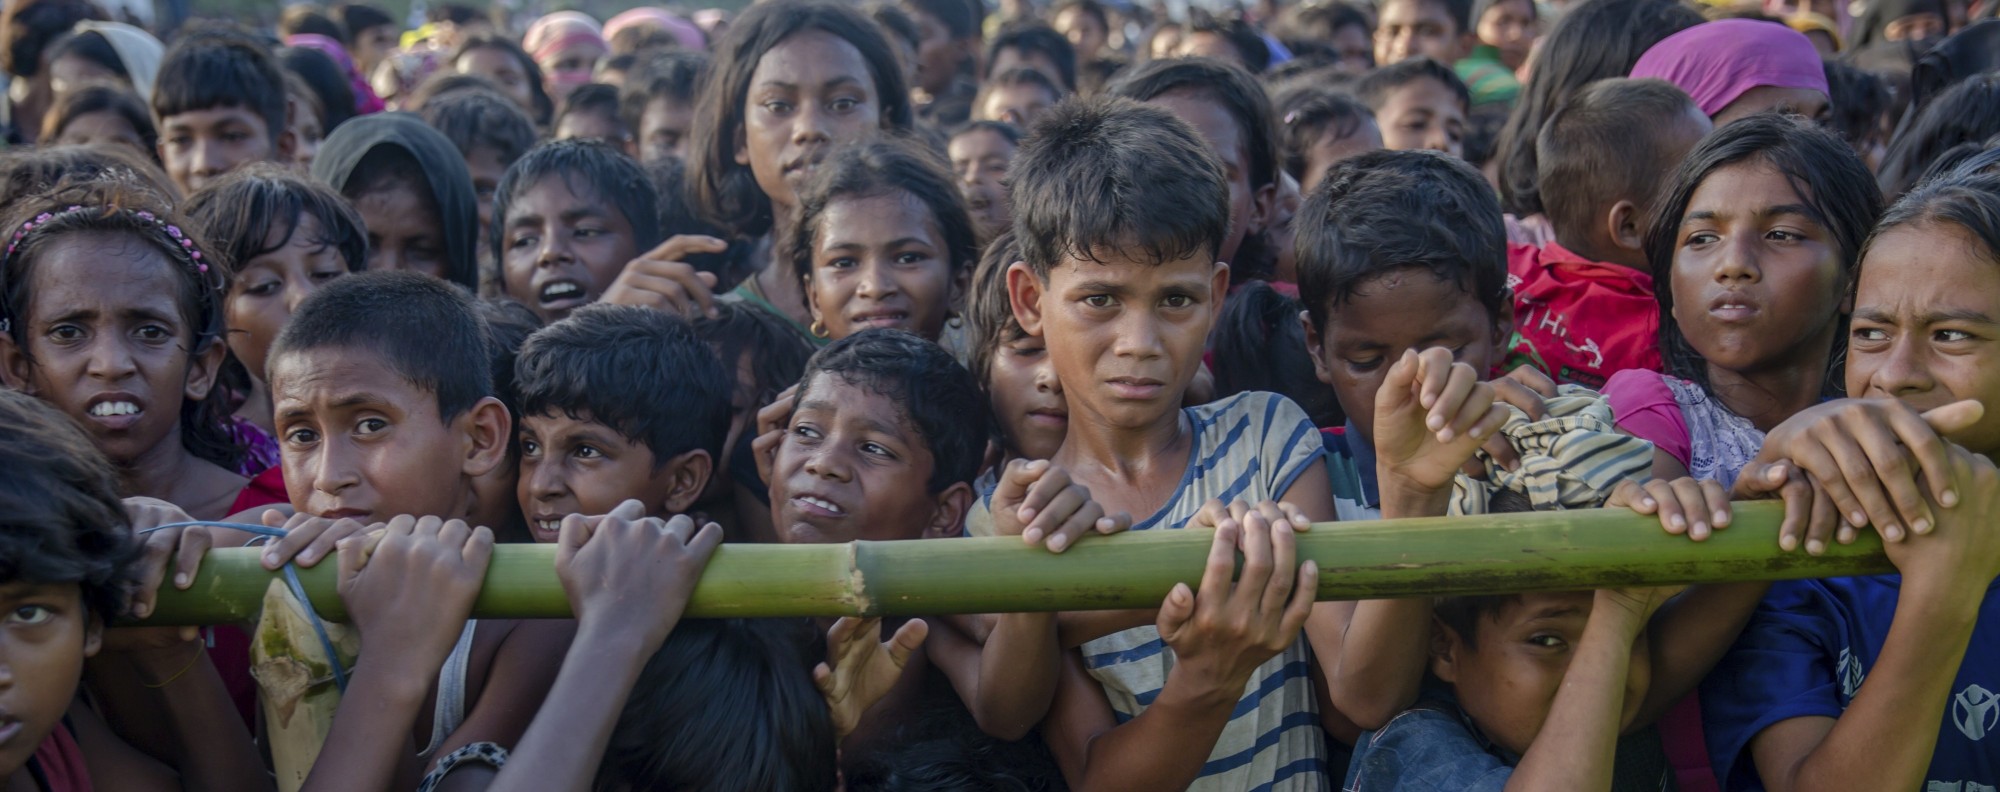 UN investigators renew call for Myanmar military officials to face charges of genocide